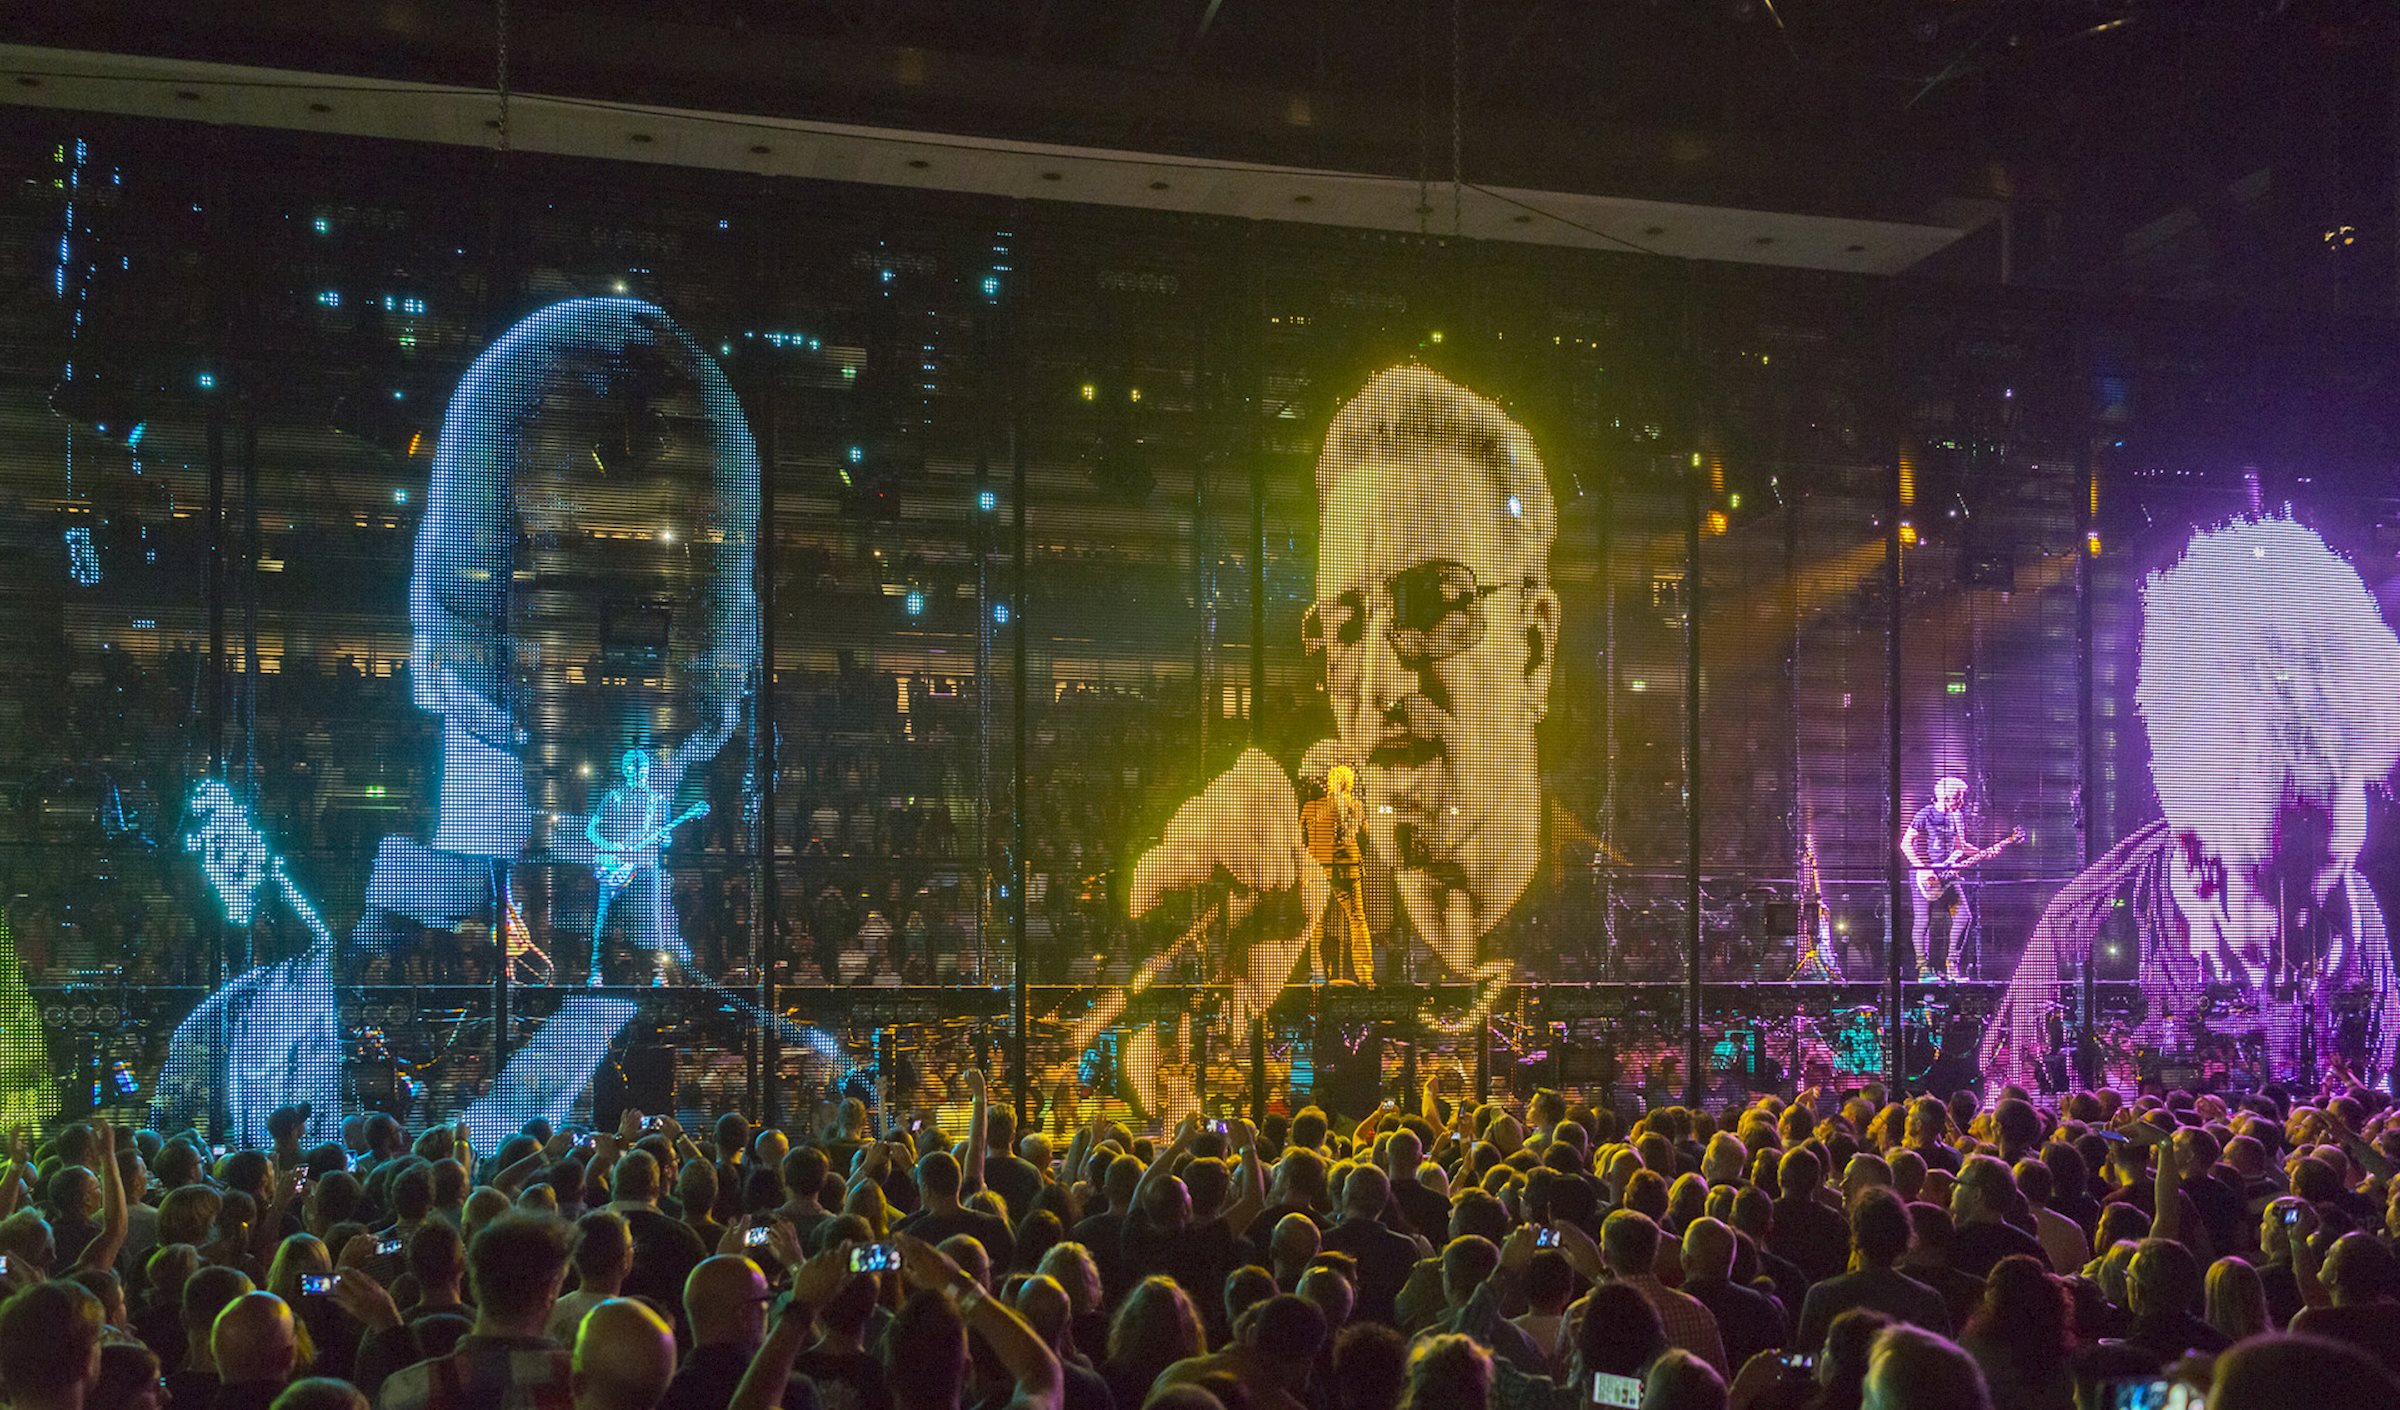 Pure10 and Rolling Video Floor Risers - PRG introduces the new Touring revolution live with U2´s Experience + Innocence Tour